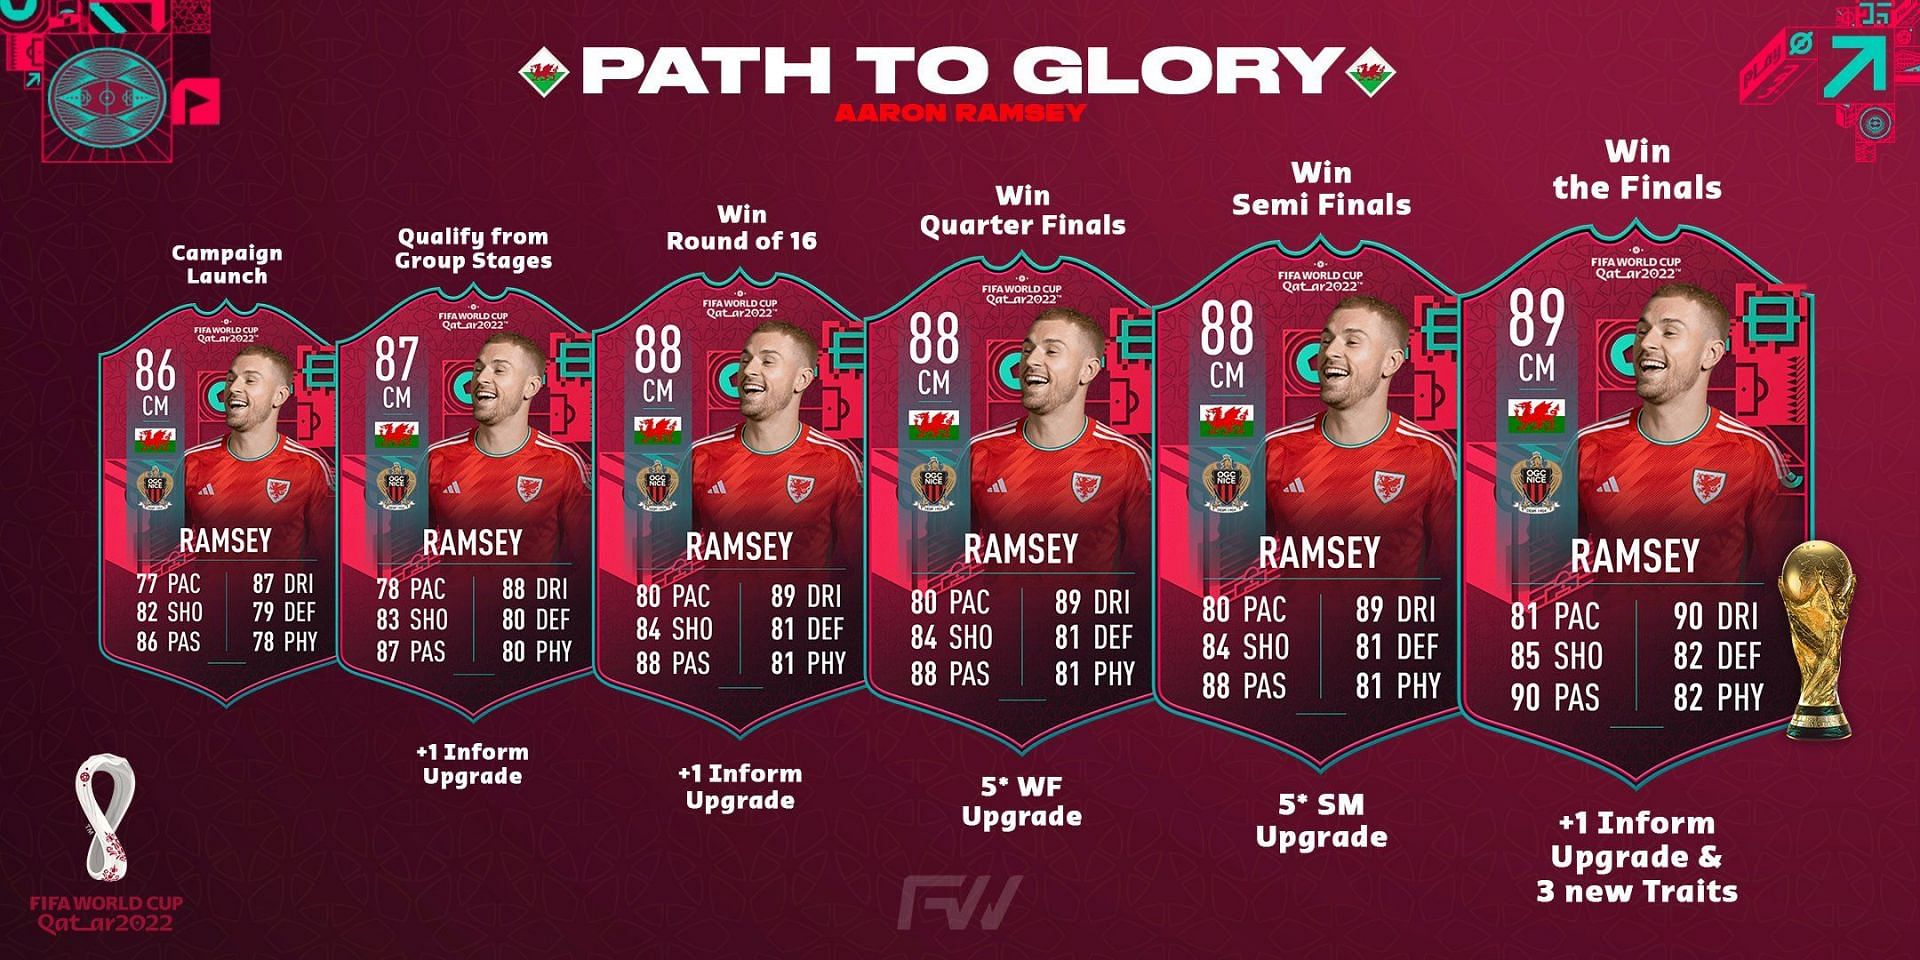 FUT Sheriff - 💥Reus🇩🇪 is listed to come as PATH TO GLORY